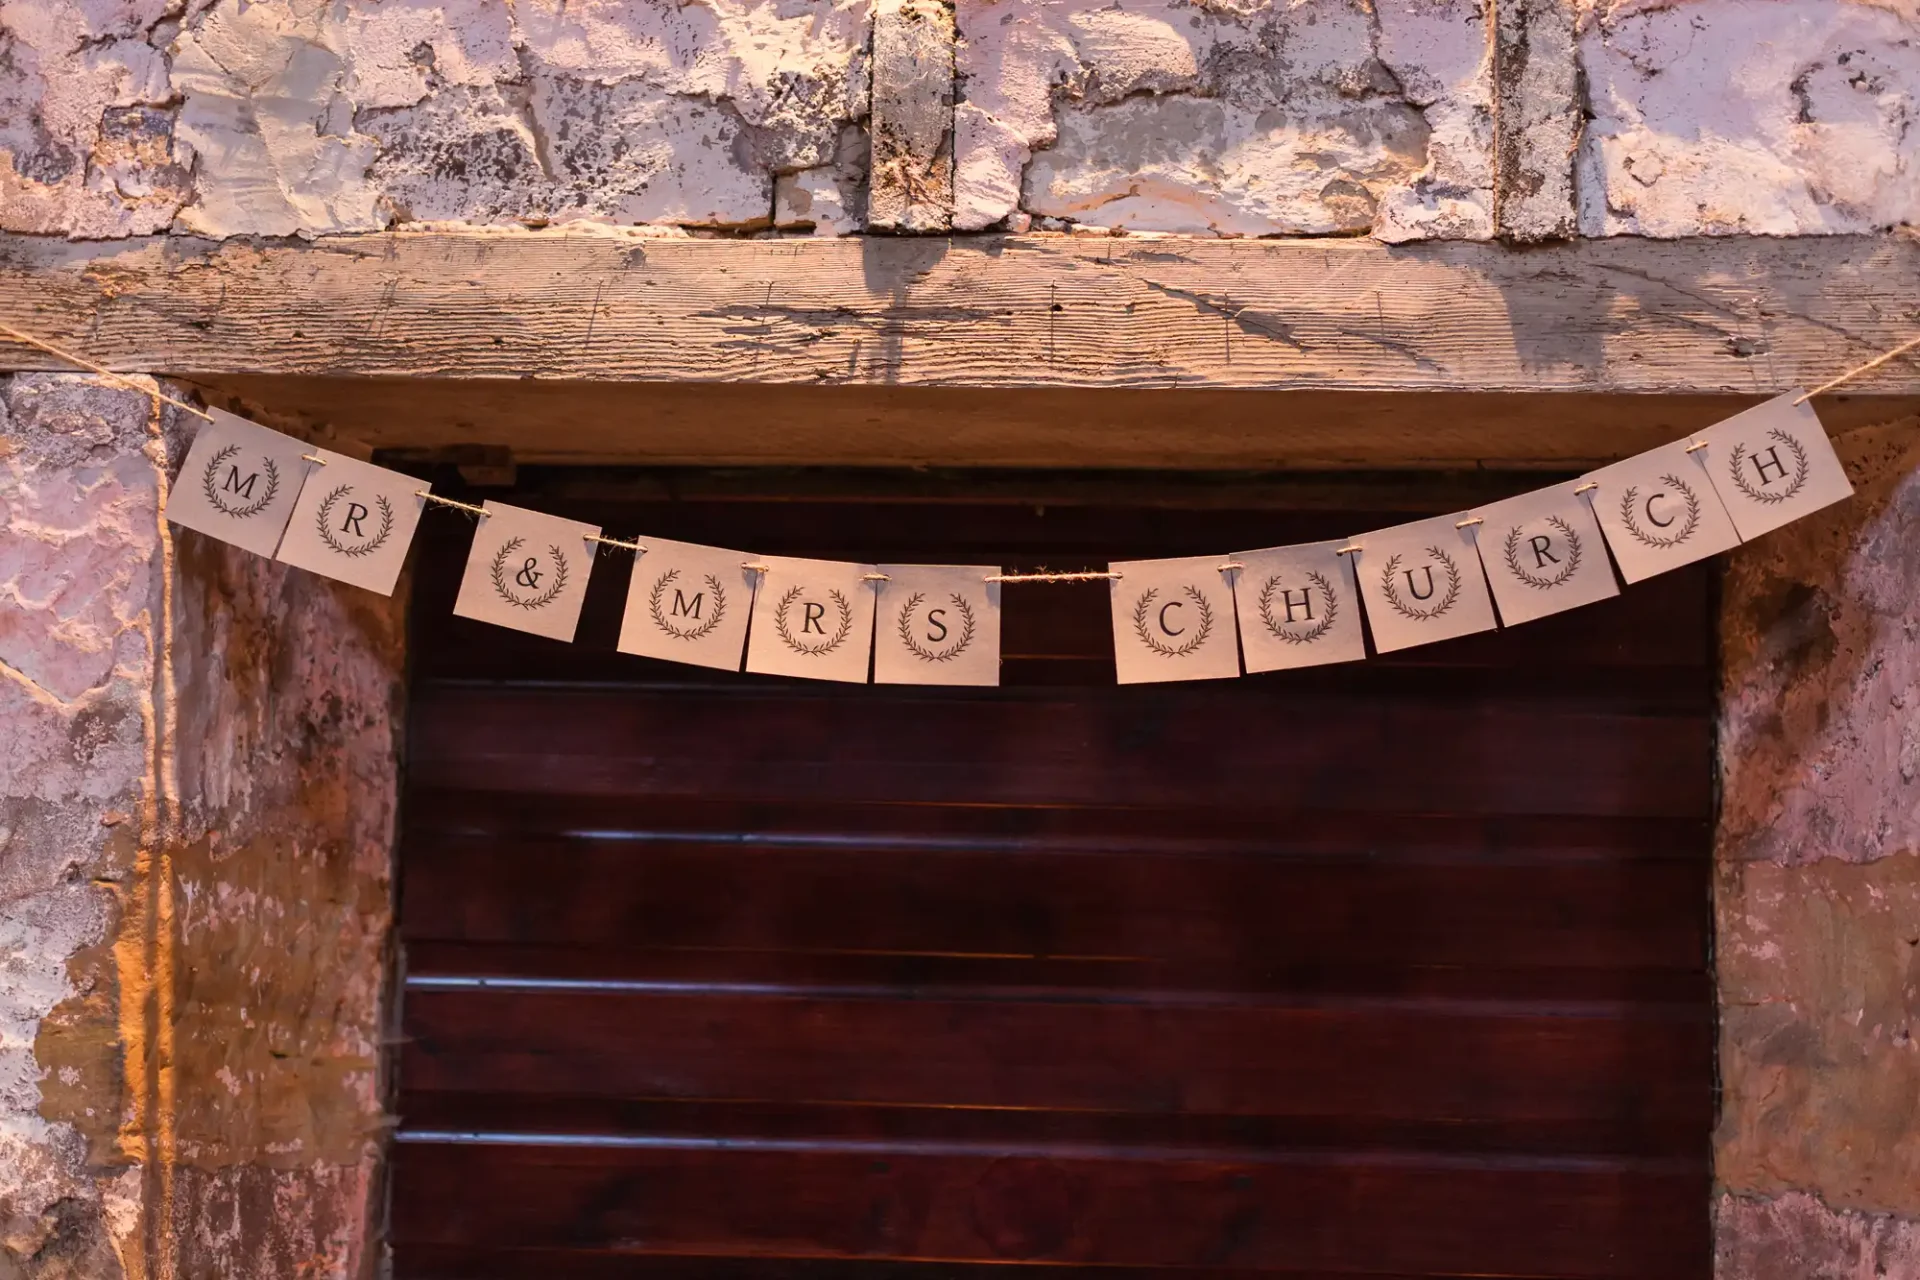 A banner reading "mr & mrs church" hangs on a rustic stone wall above a dark wooden door.